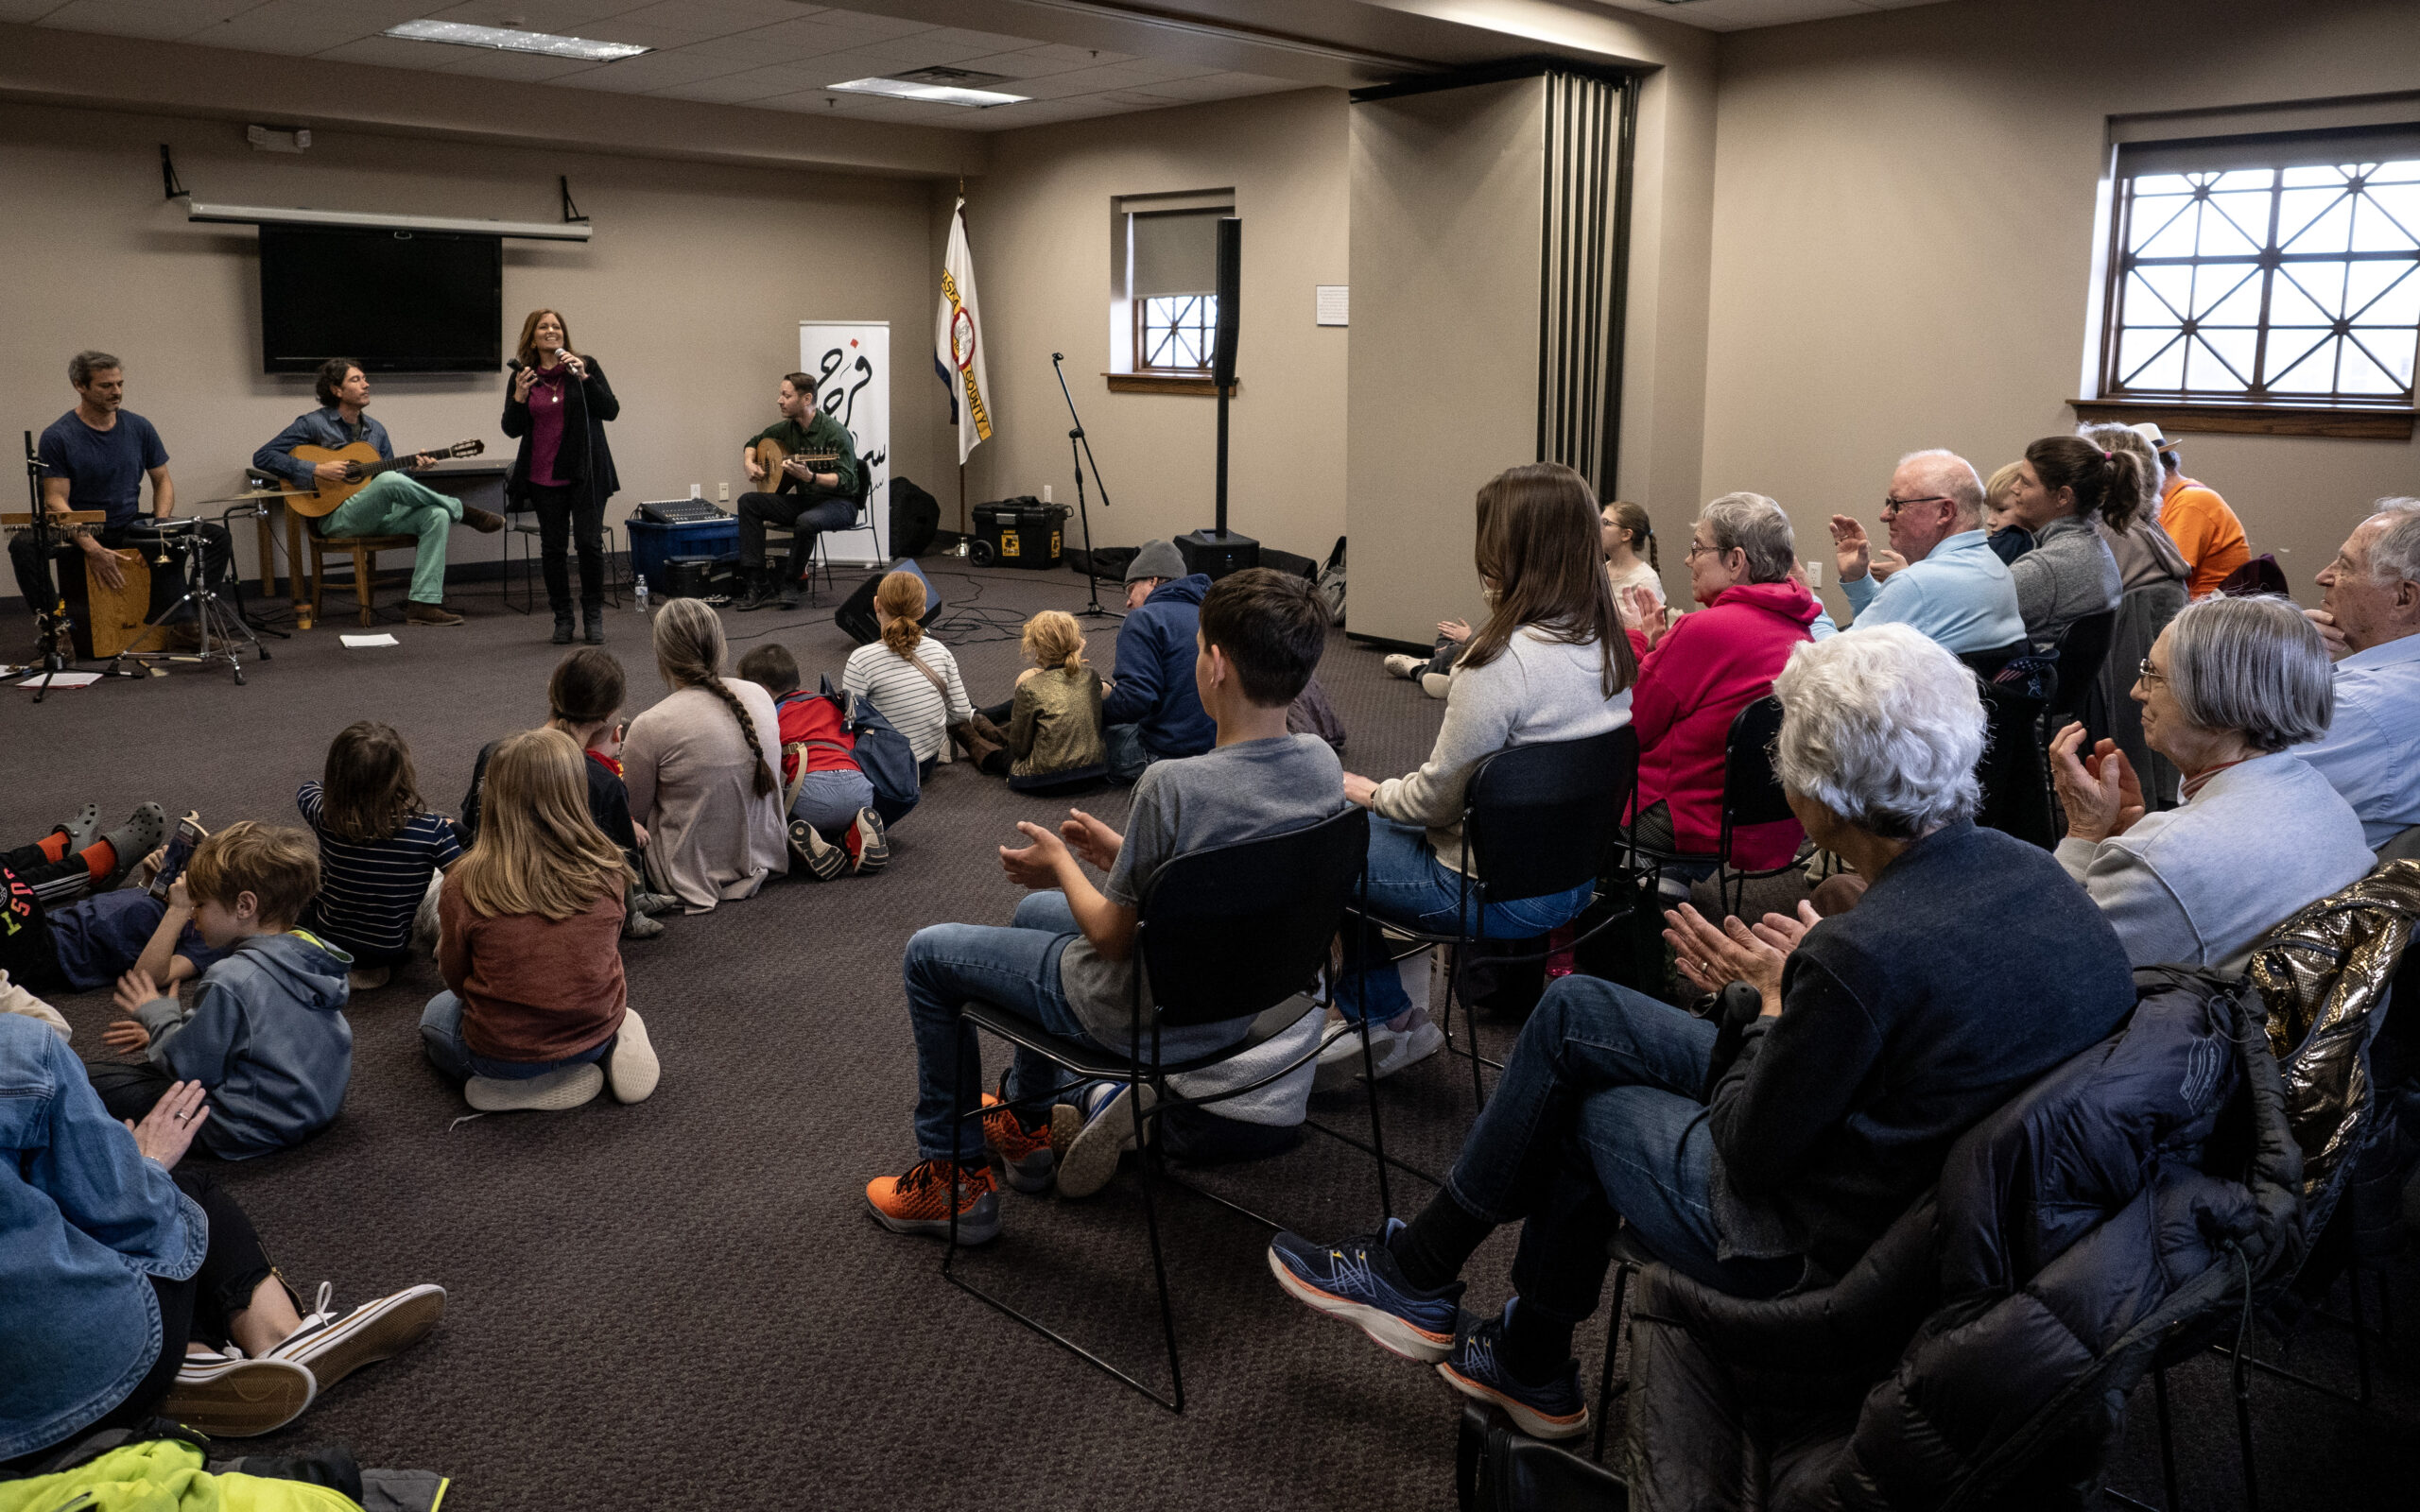 A woman performs with her band to an audience of onlookers of all ages at a public library's presentation room